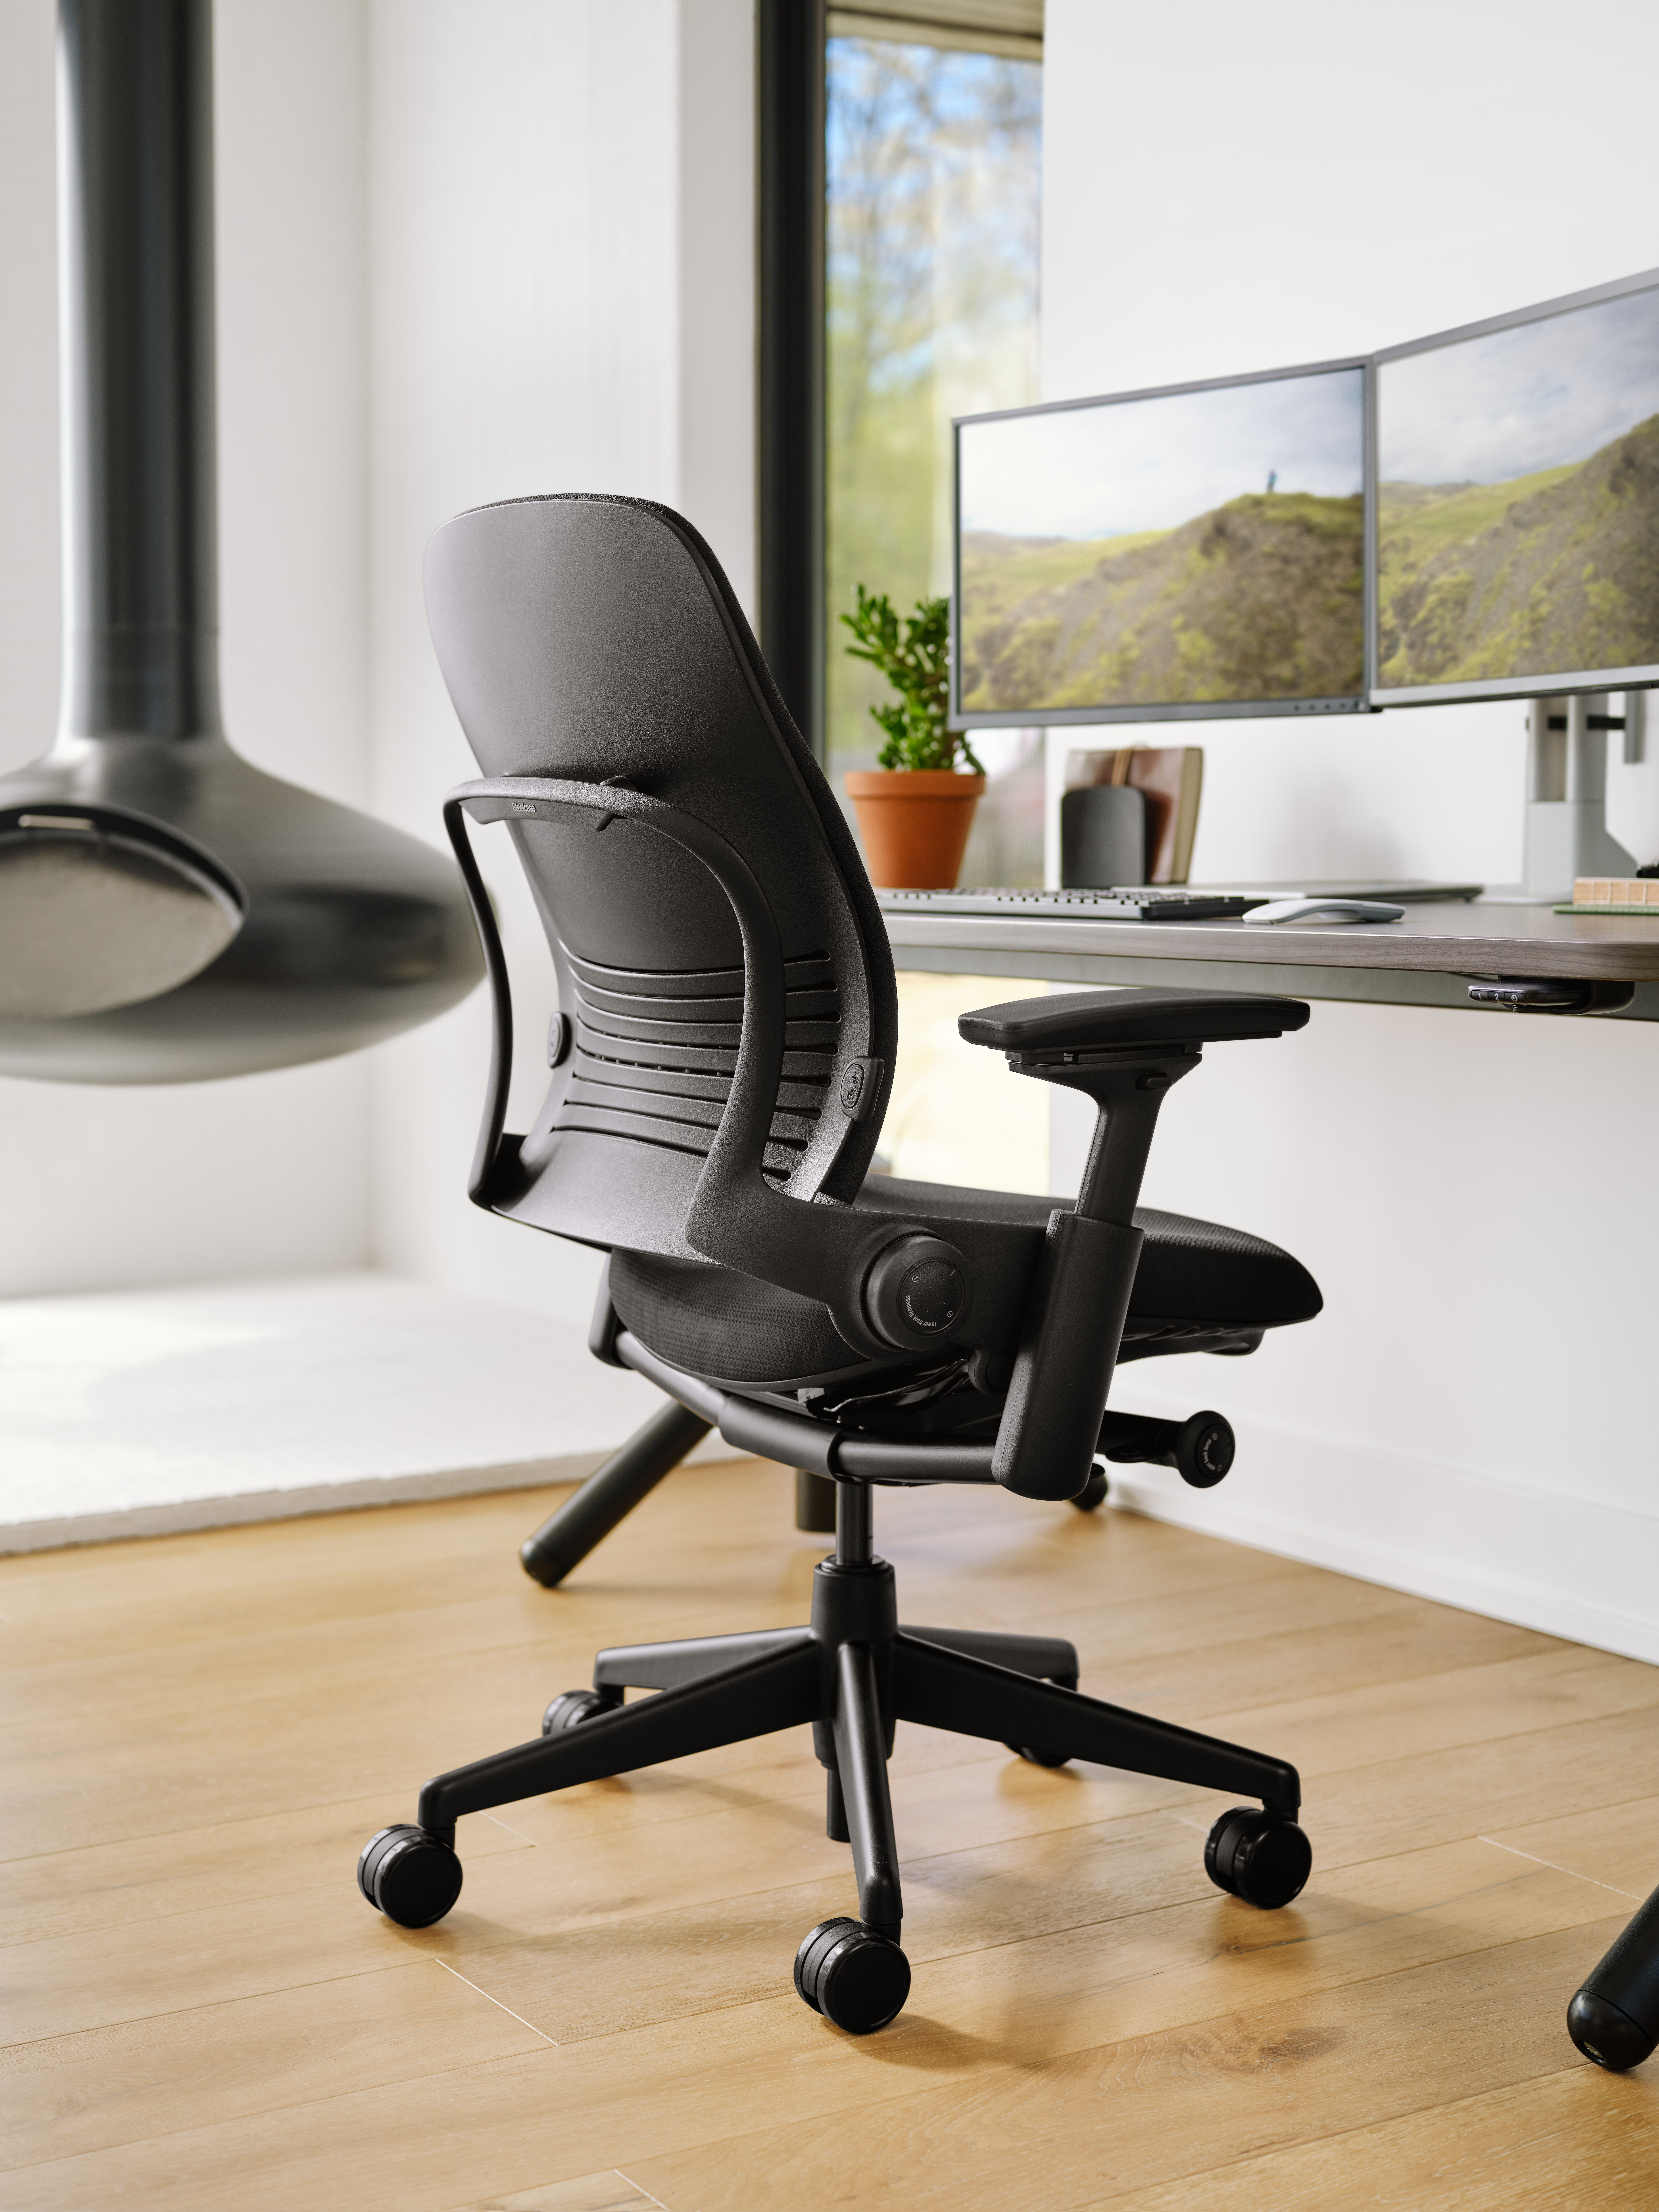 Leap chair in a work from home environment